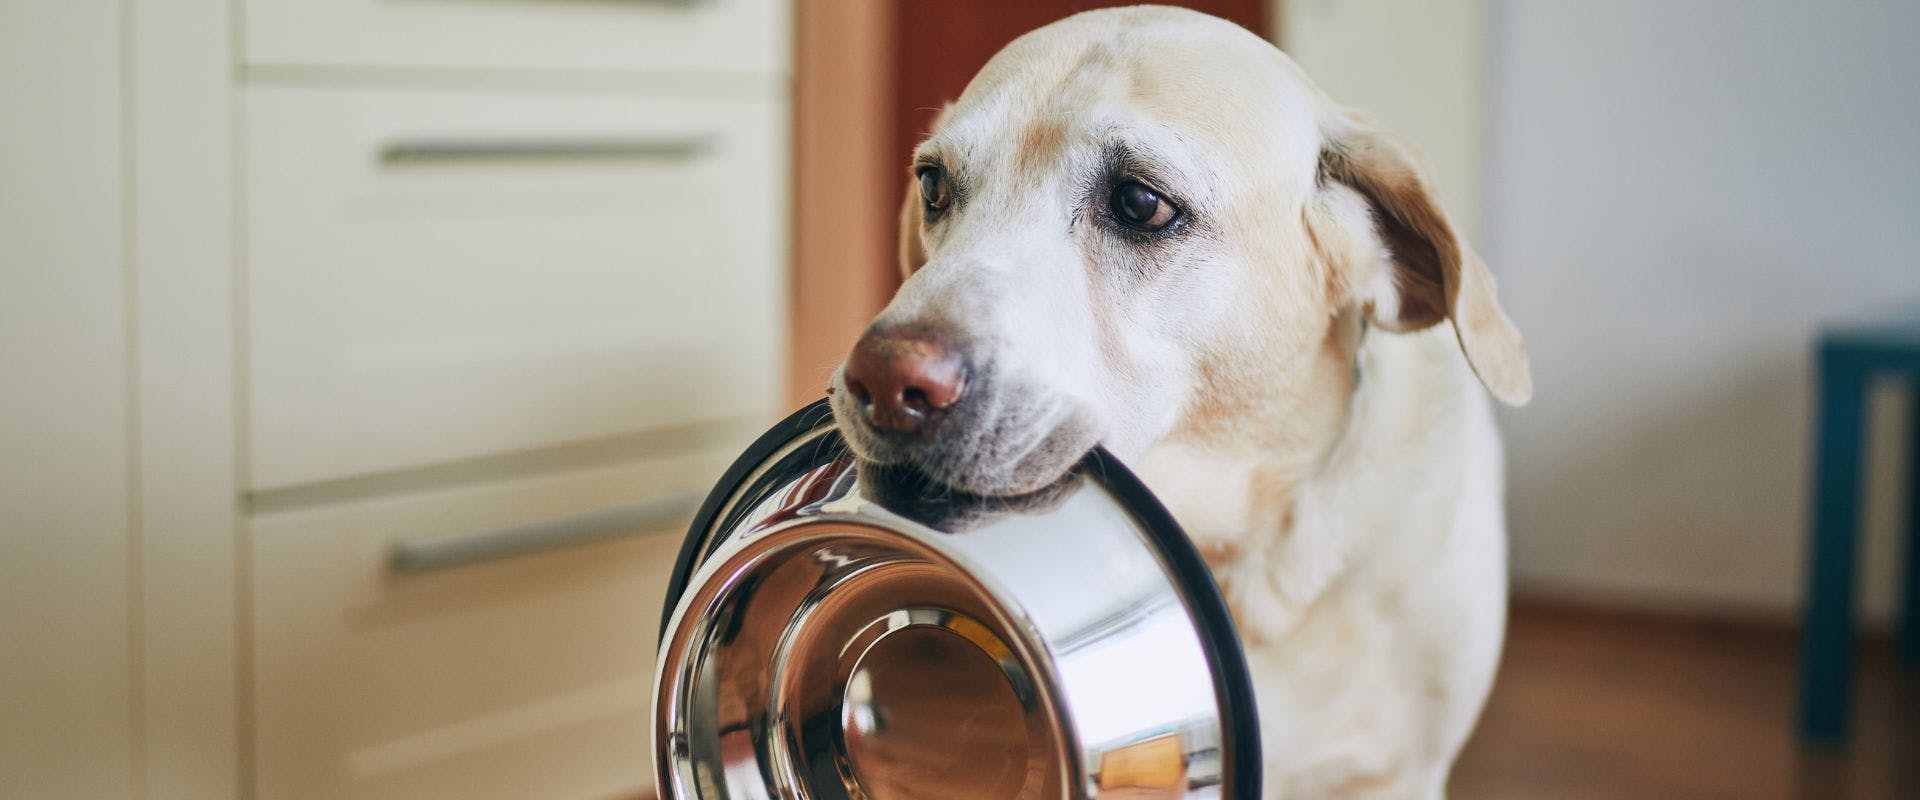 Labrador holding a metal bowl in their mouth